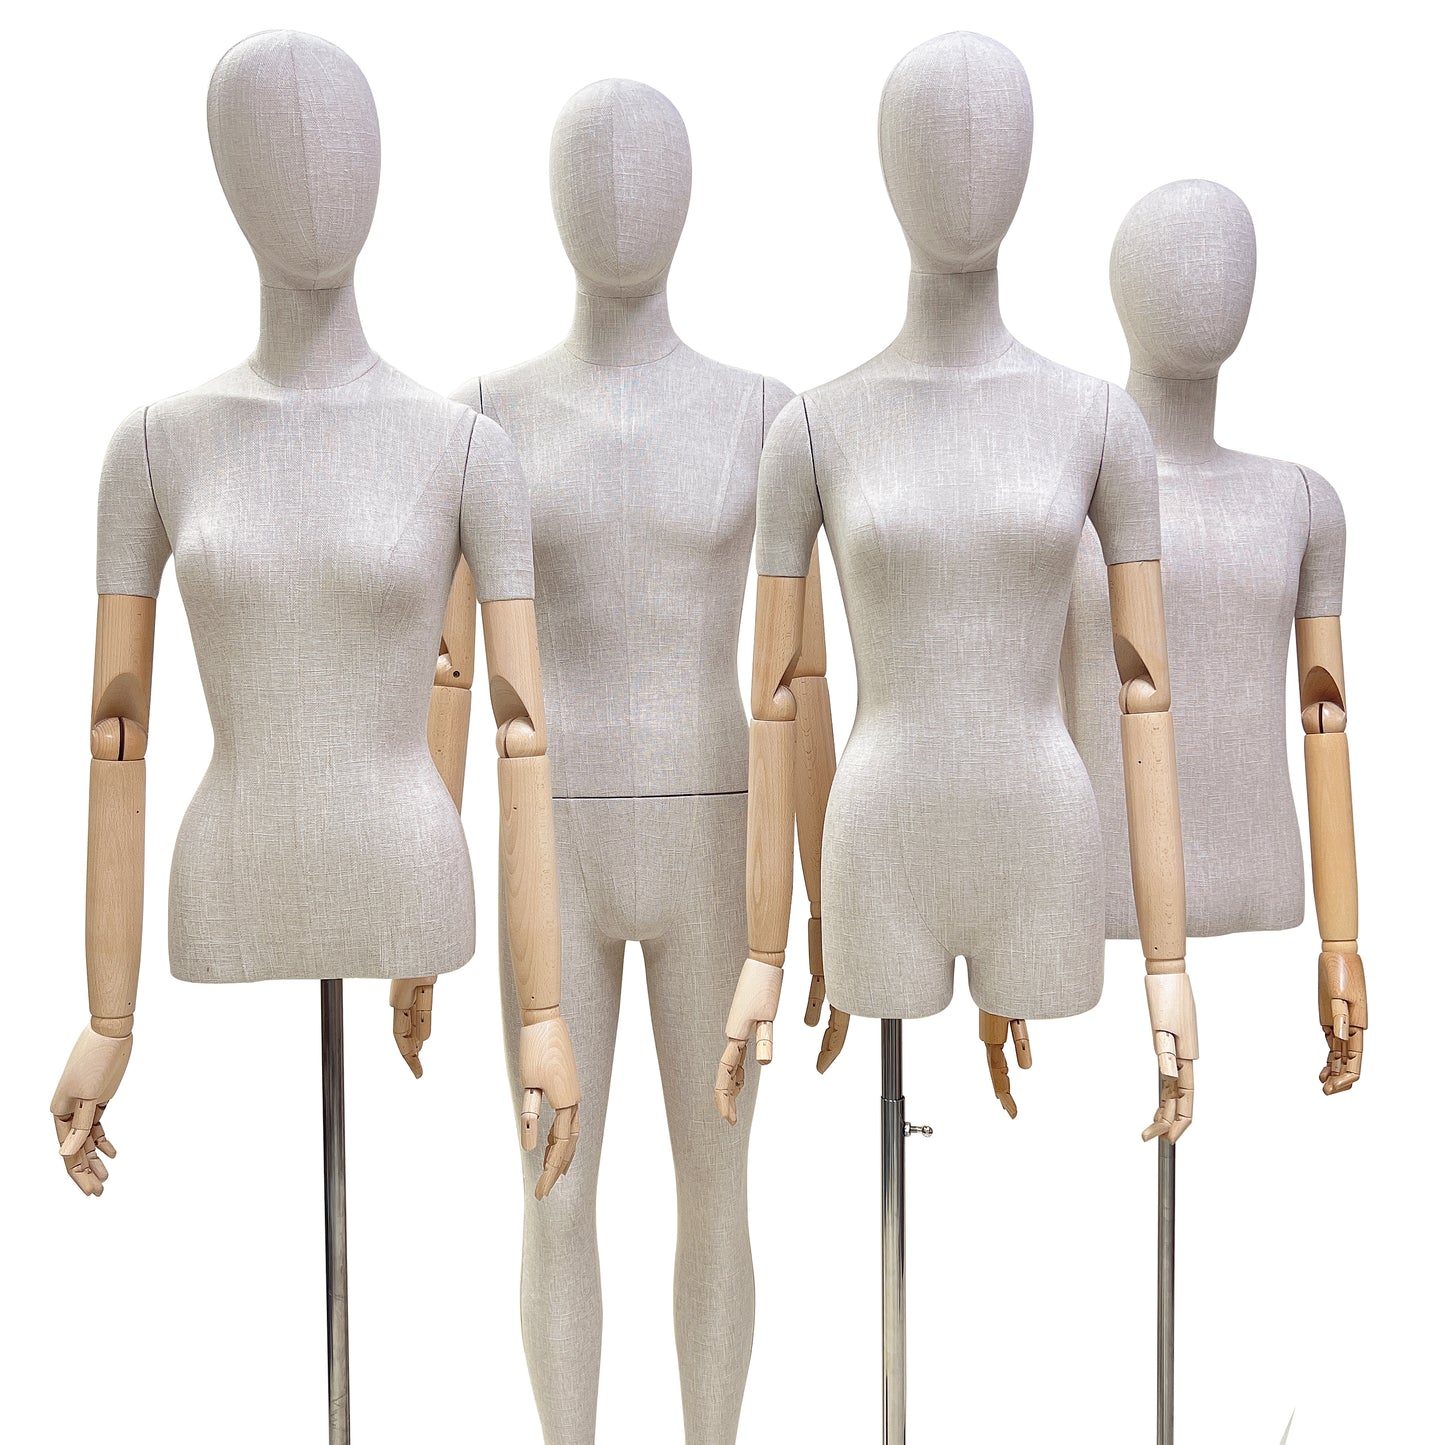 New Luxury Style LInen Mannequin,Female/Male Full Body/Half Body Mannequin,Wedding Dress Display,Mannequin for Clothes Show,Shop Display